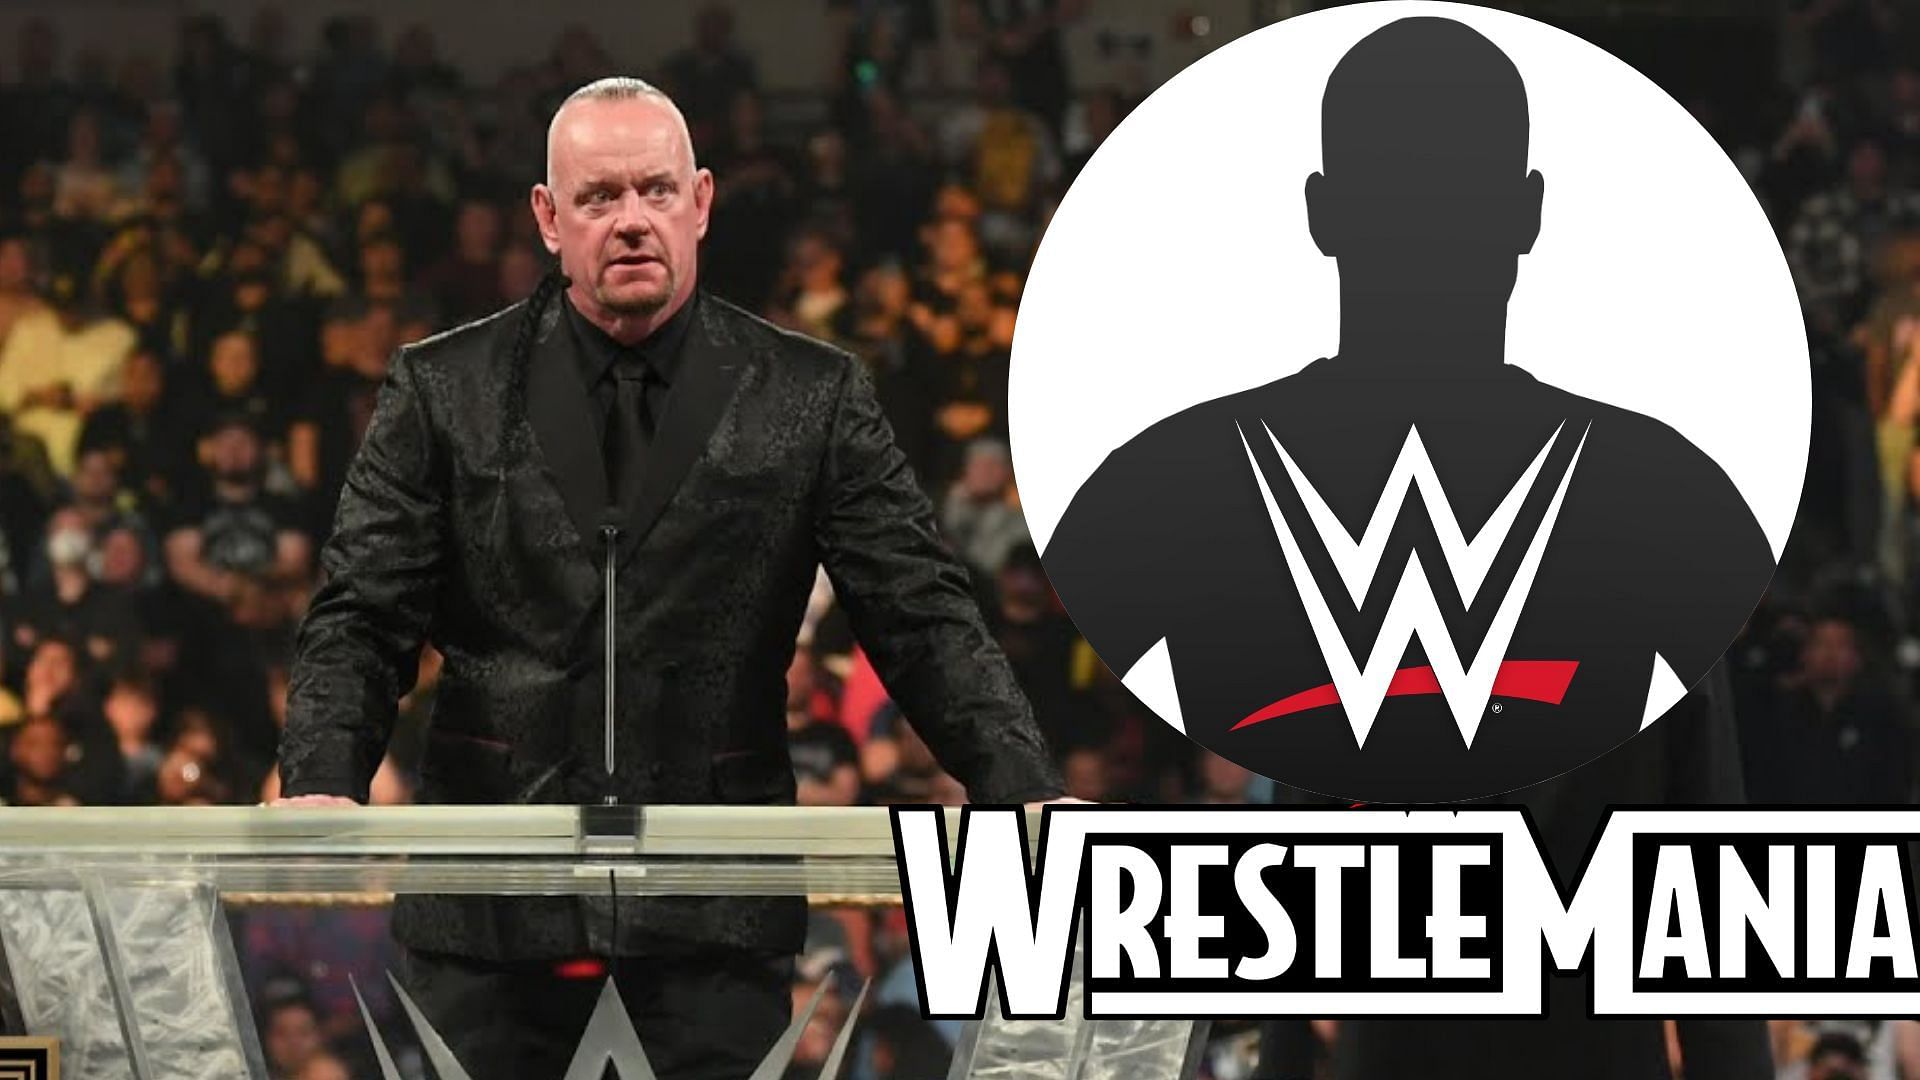 Undertaker was leaned on for guidance amid growing doubts over a WrestleMania bout